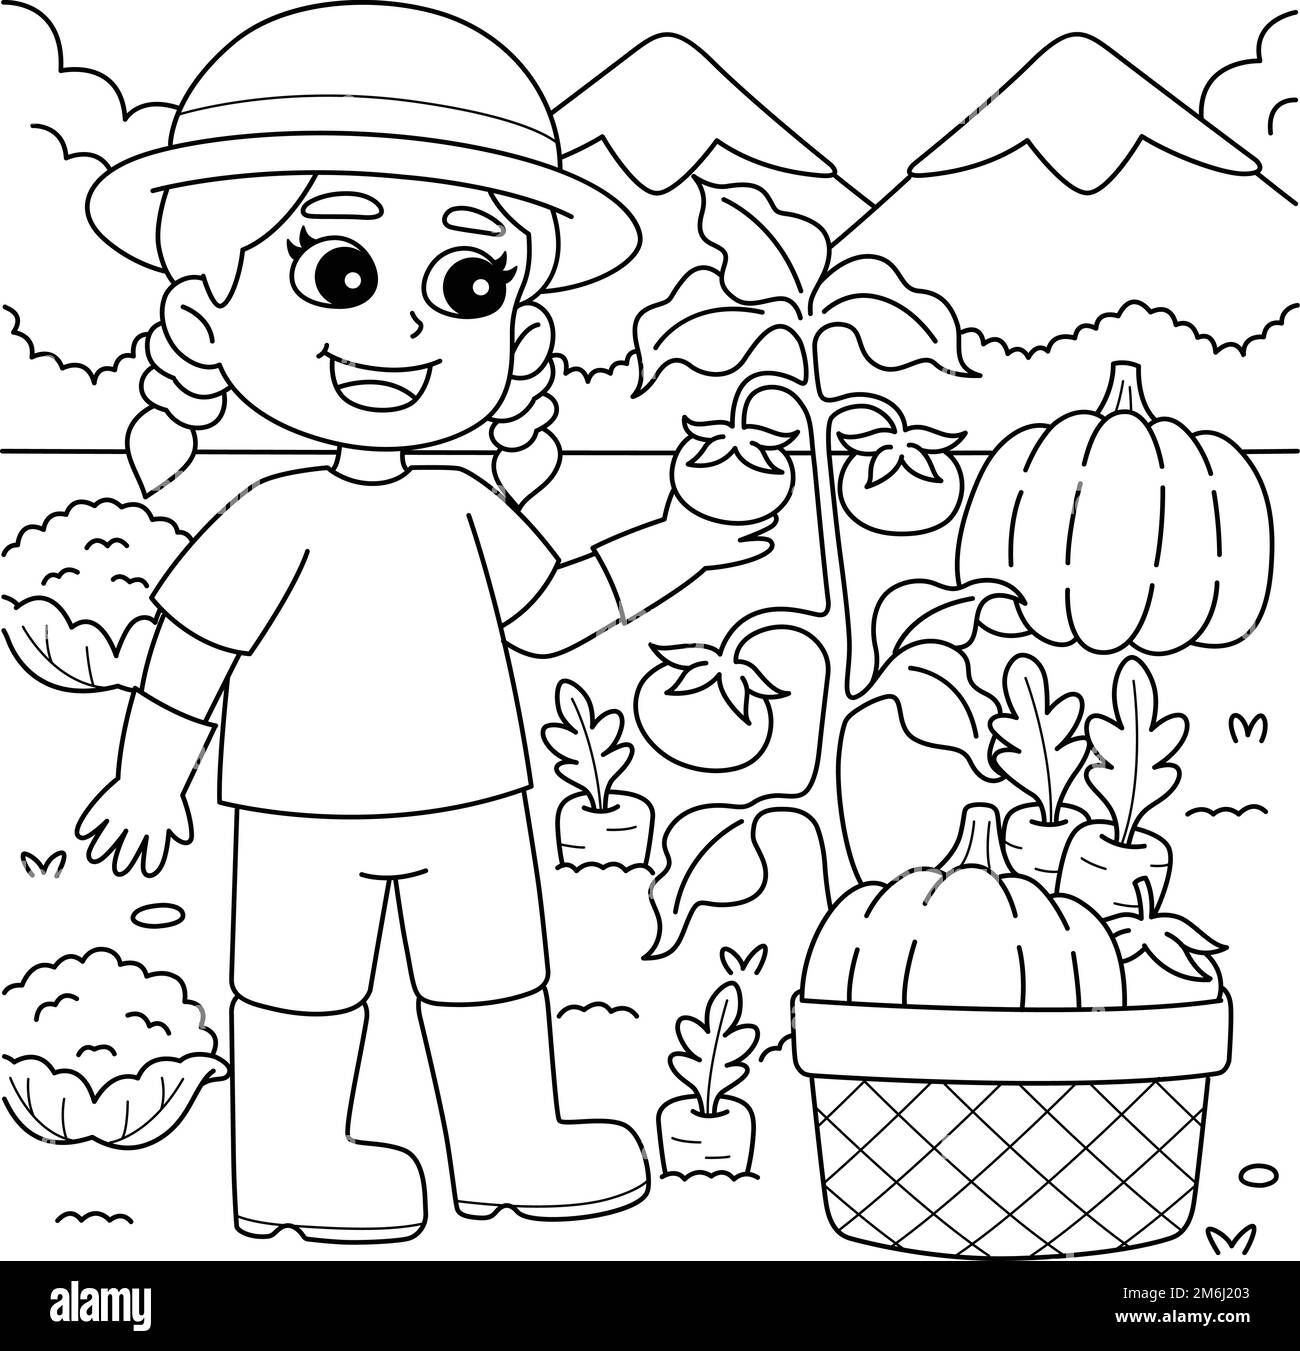 Girl Planting Vegetables Coloring Page for Kids Stock Vector